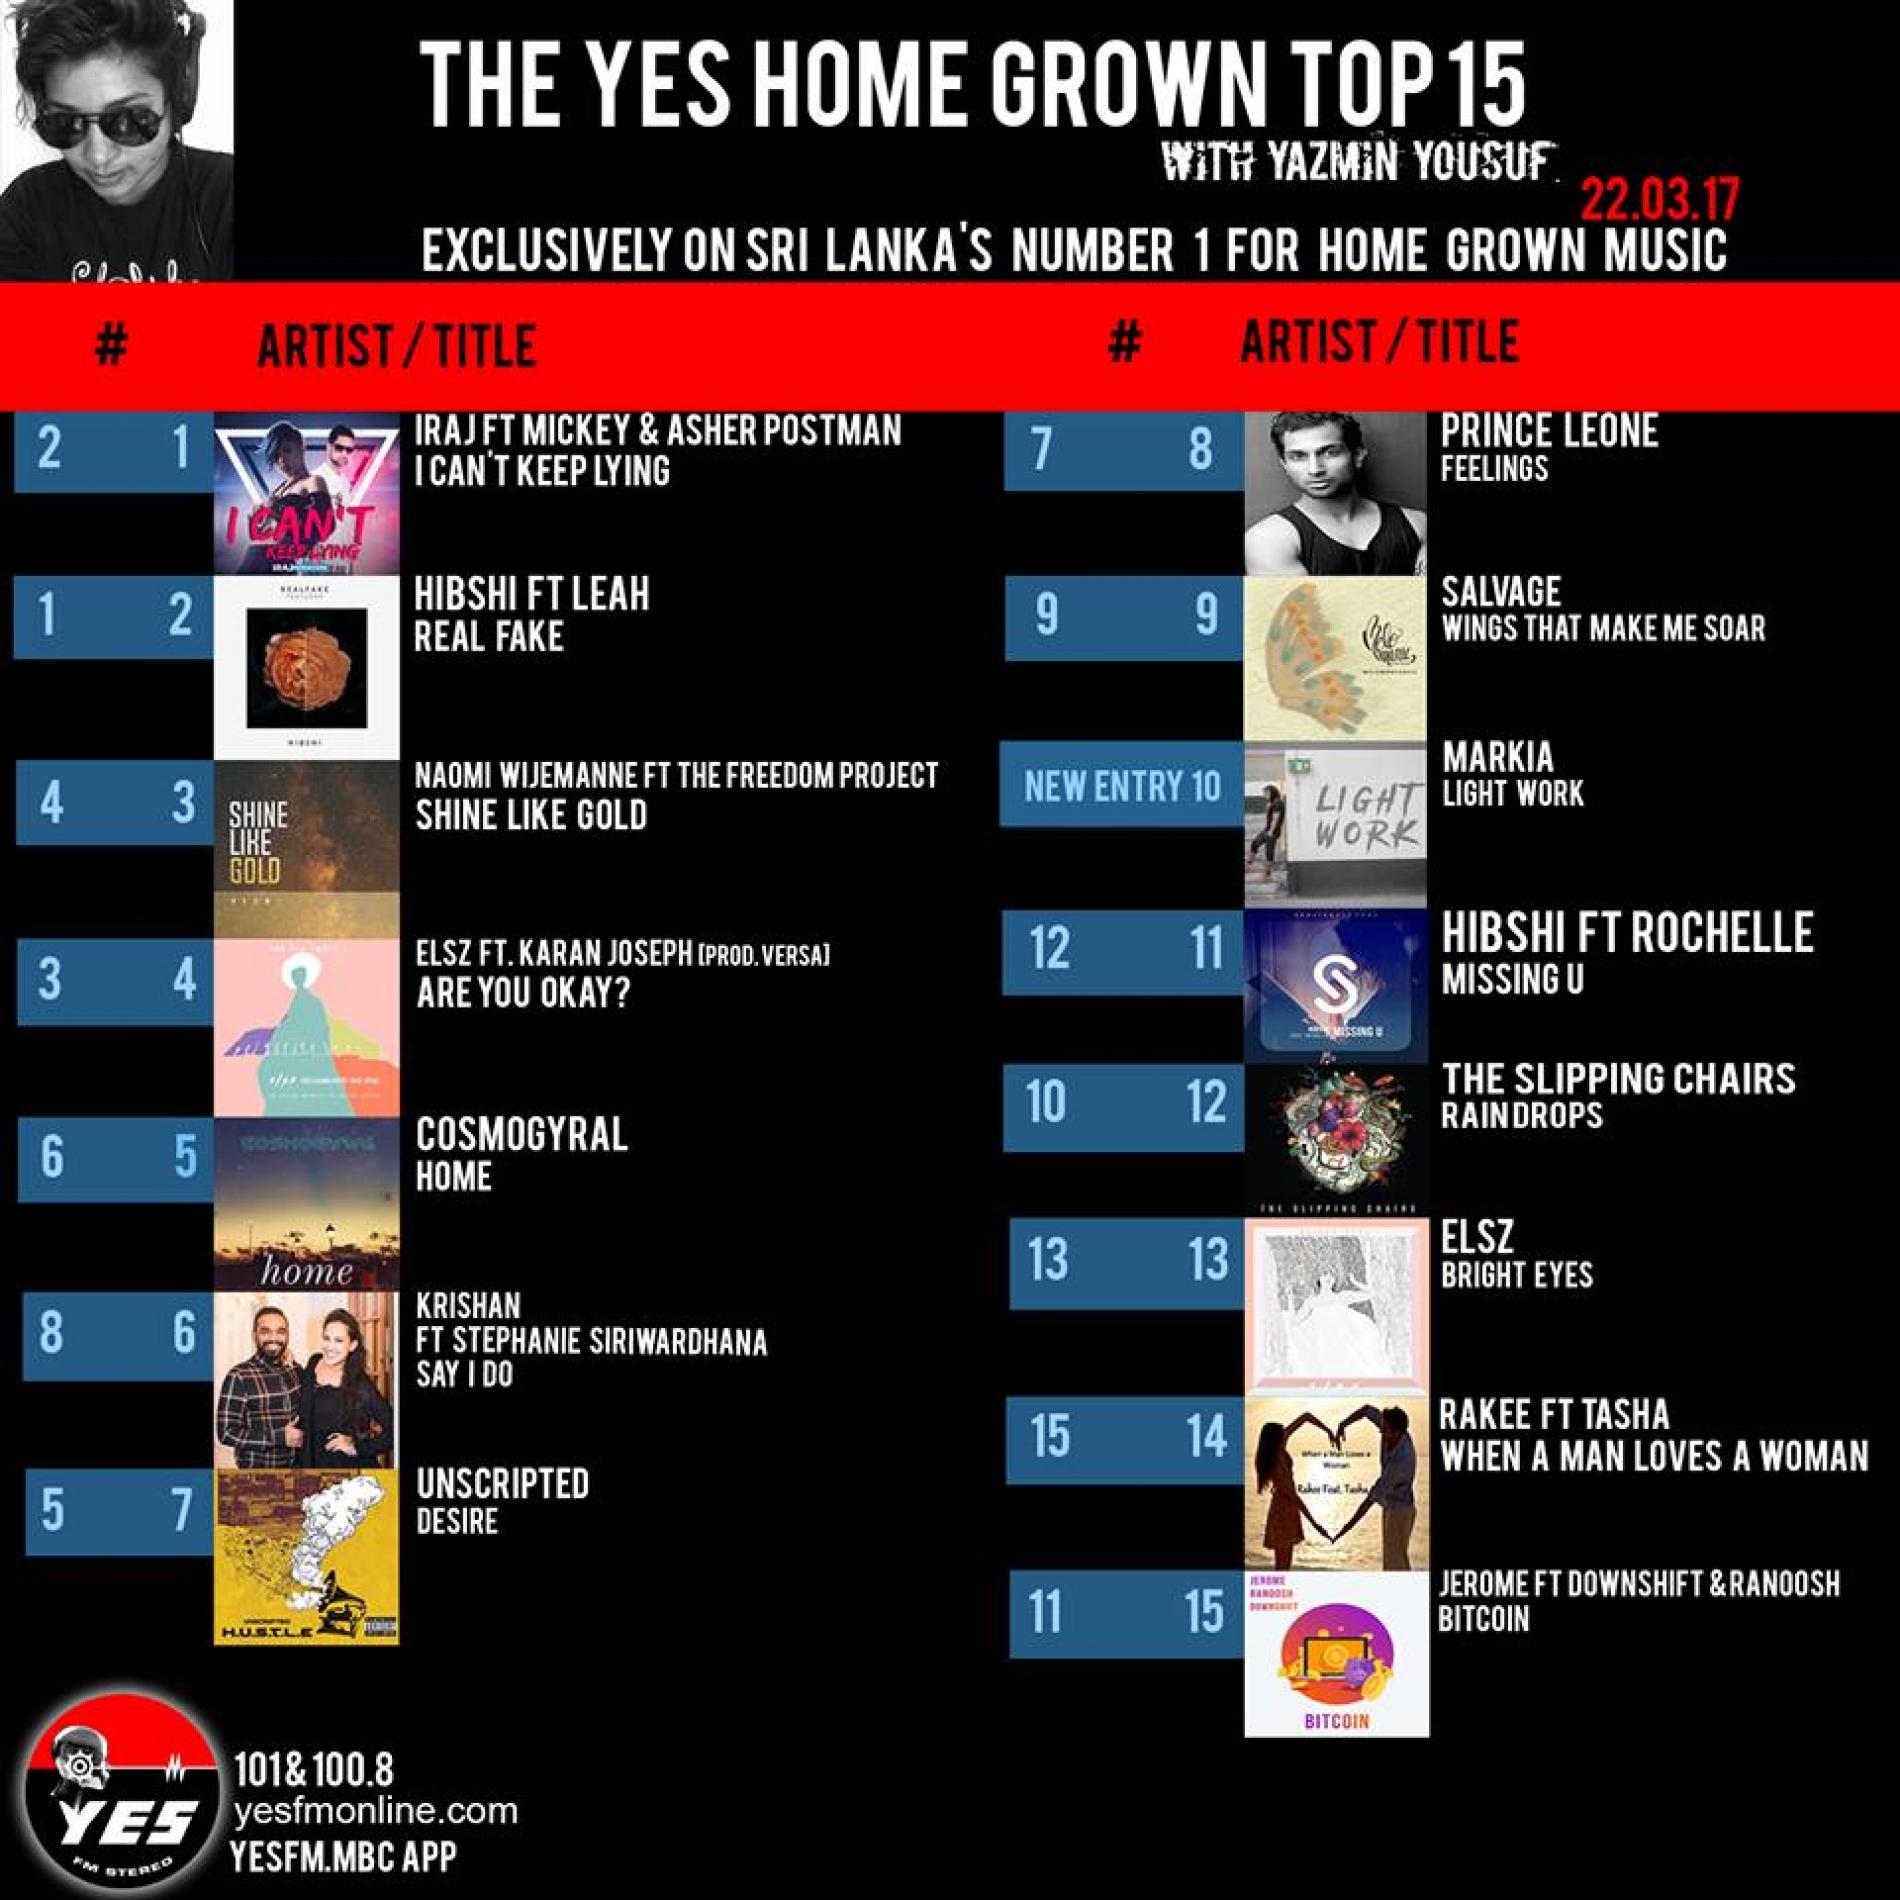 Iraj Hit Number 1 On The YES Home Grown Top 15